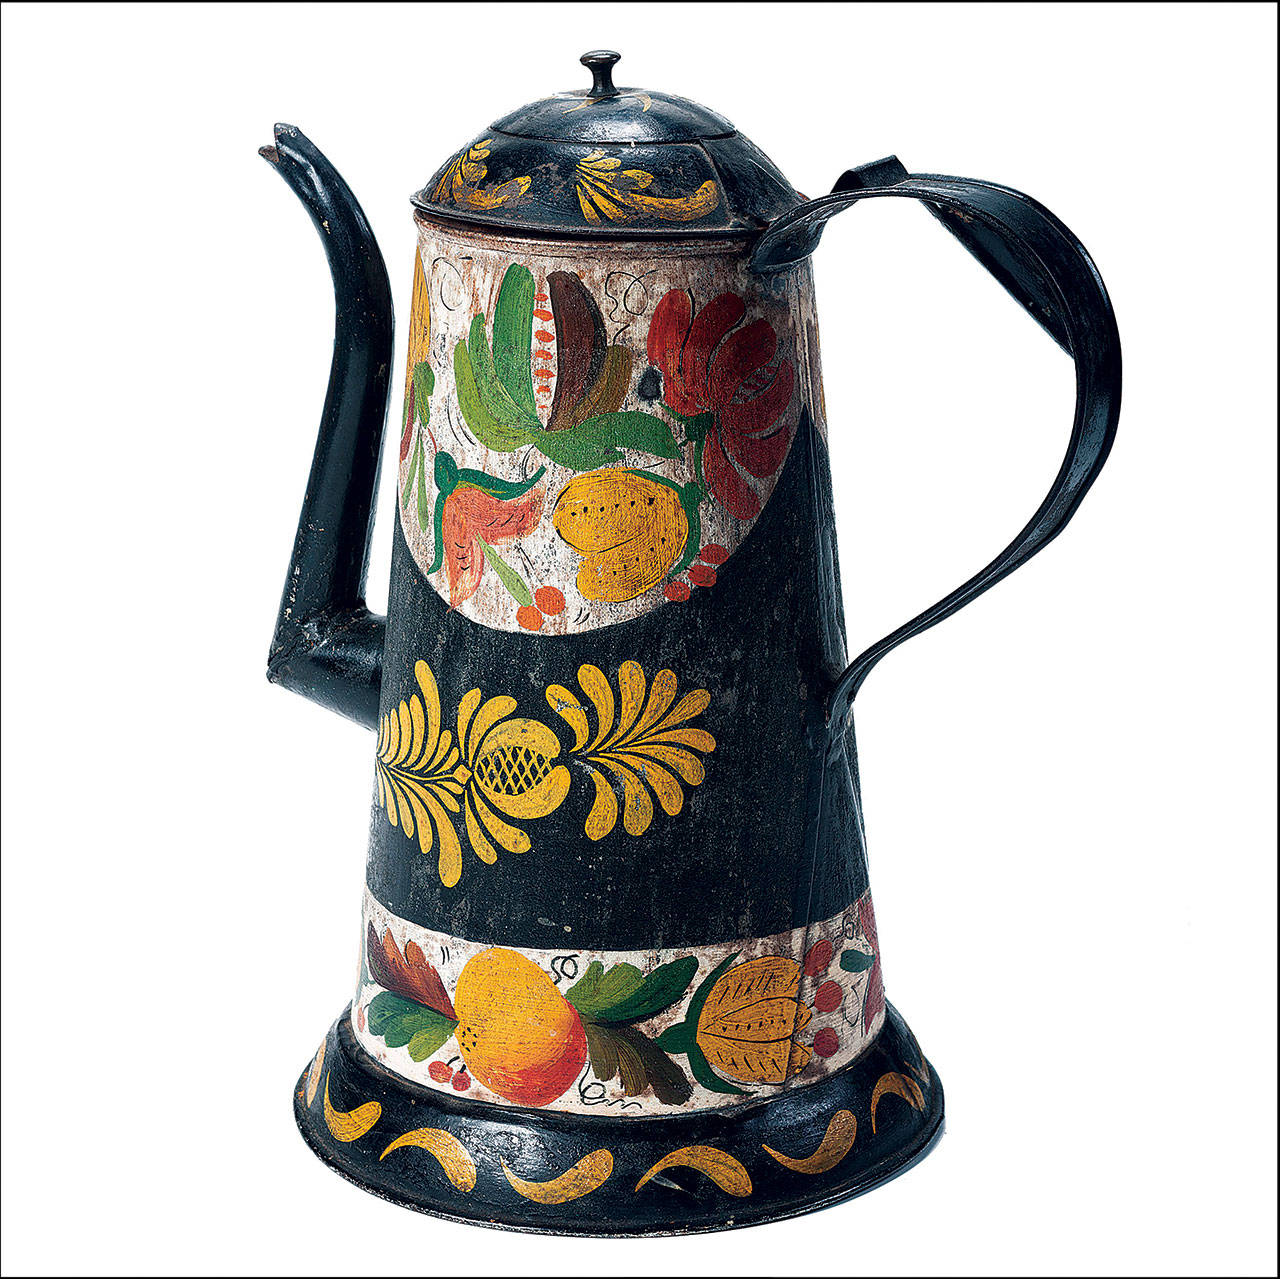 Antique Coffee Pot Patented 1902 Wear-ever Model is the 